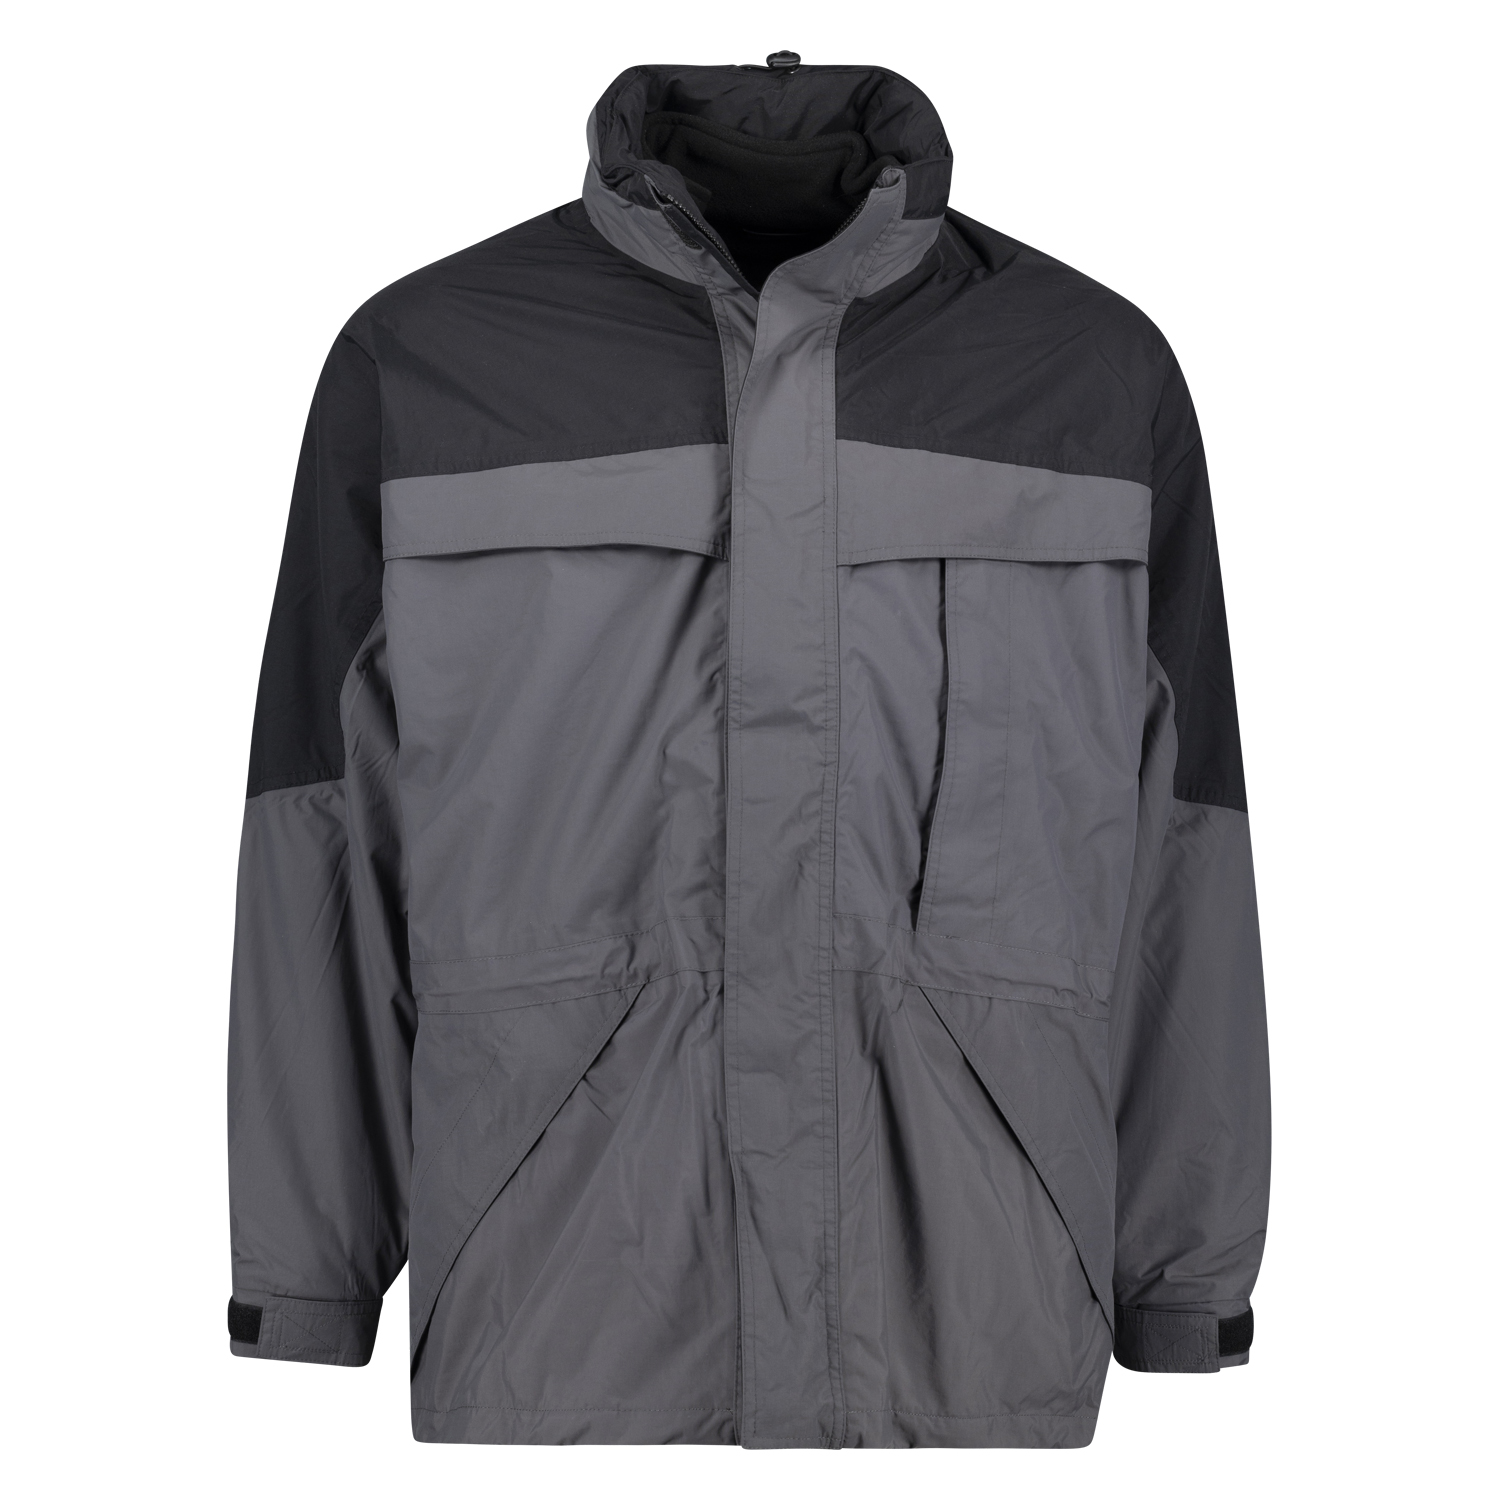 Grey 3in1 jacket by marc&mark in plus sizes until 10XL